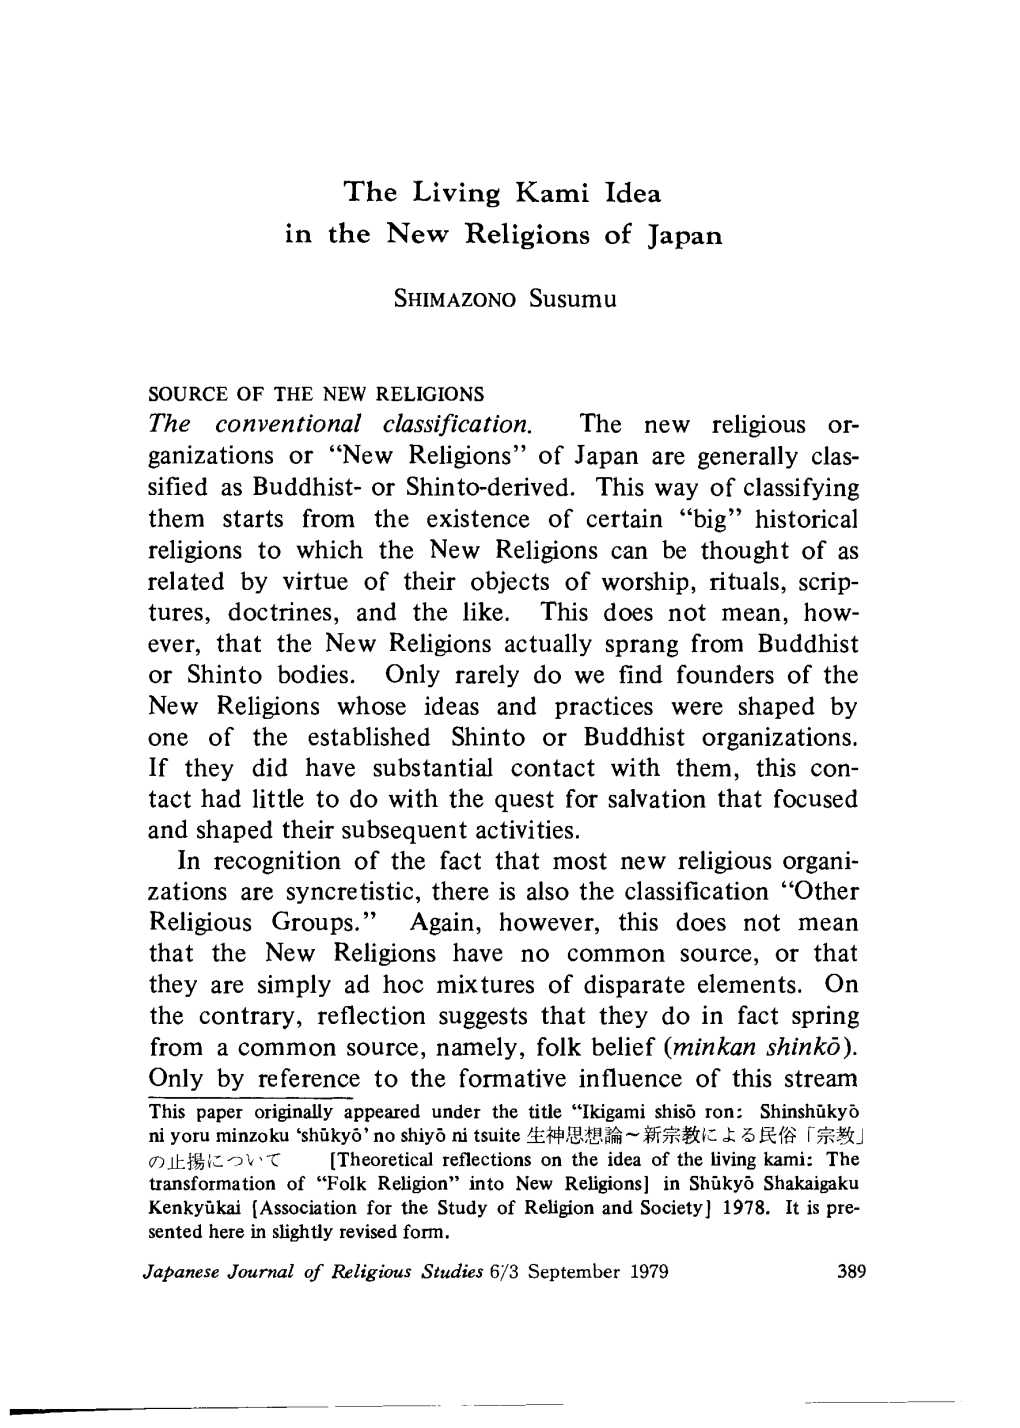 The Living Kami Idea in the New Religions of Japan